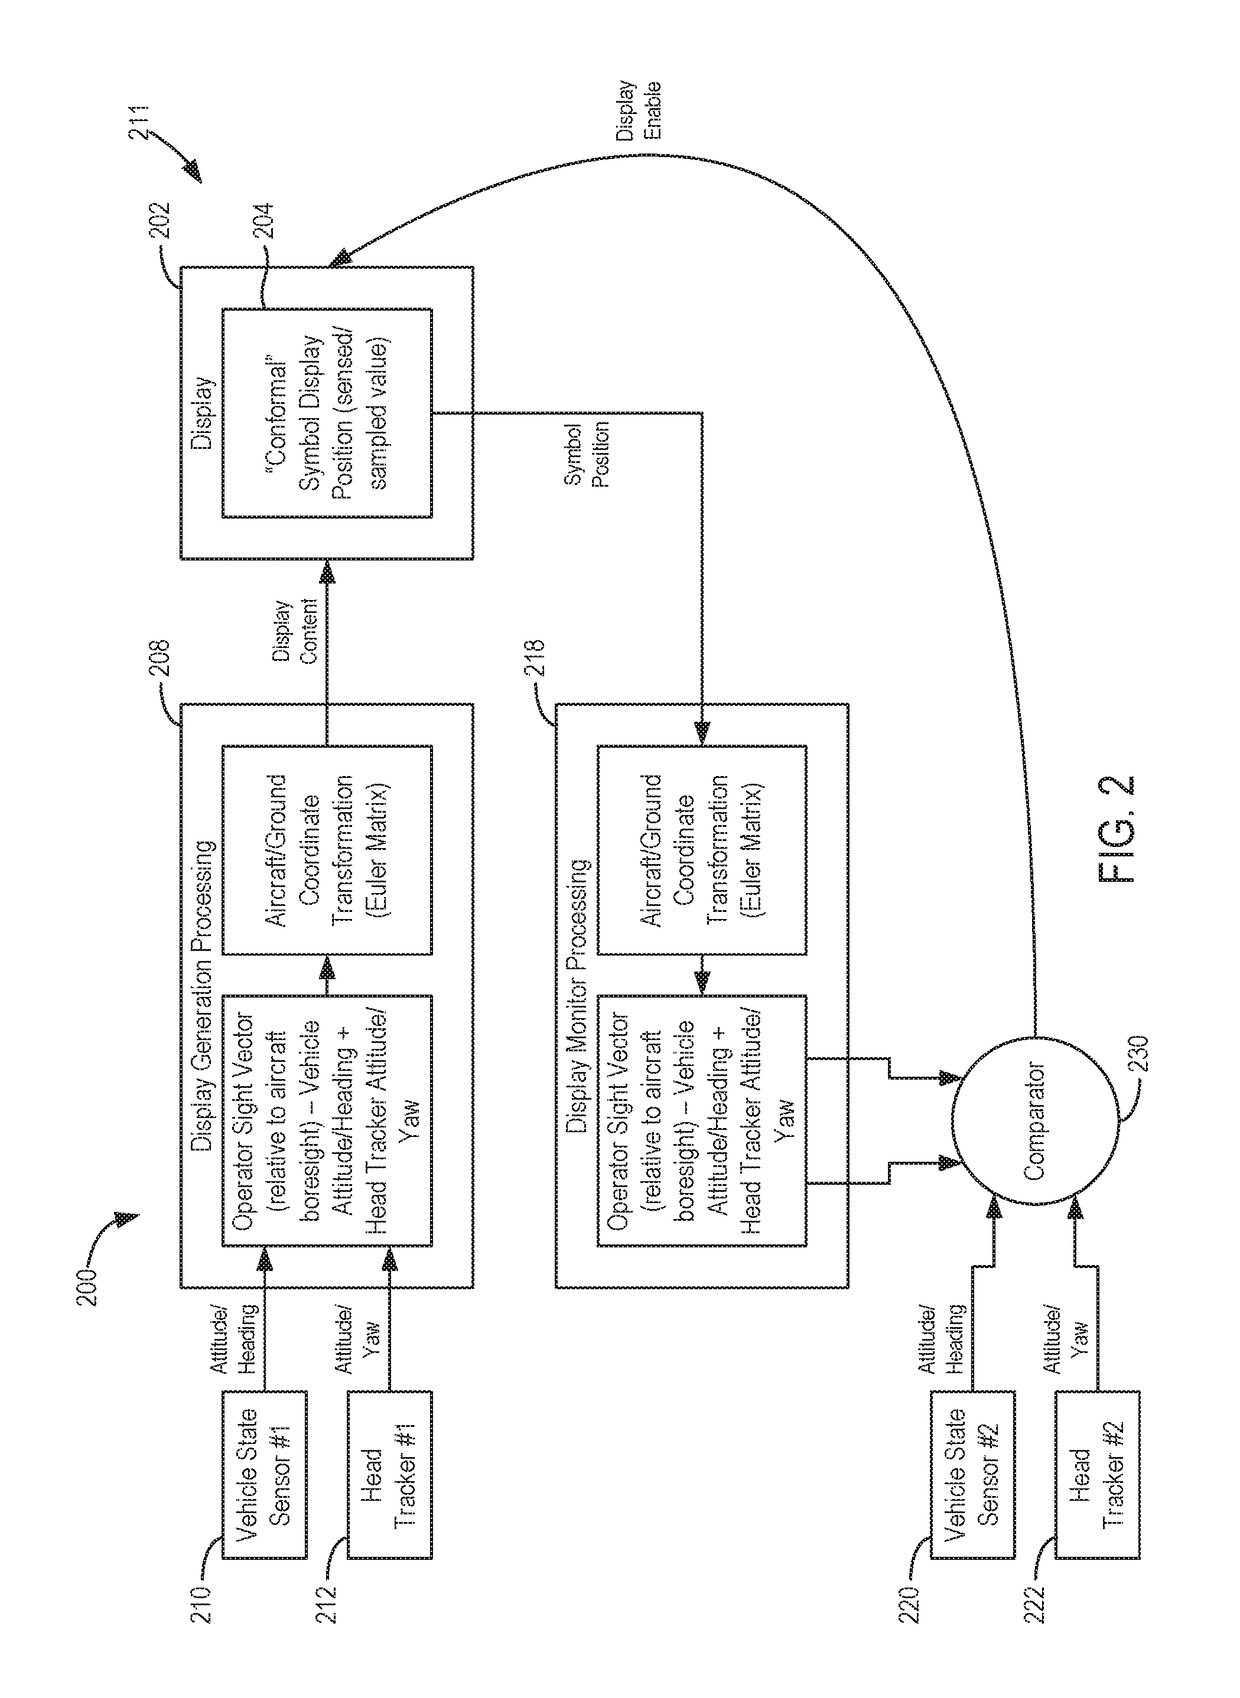 Head worn display integrity monitor system and methods